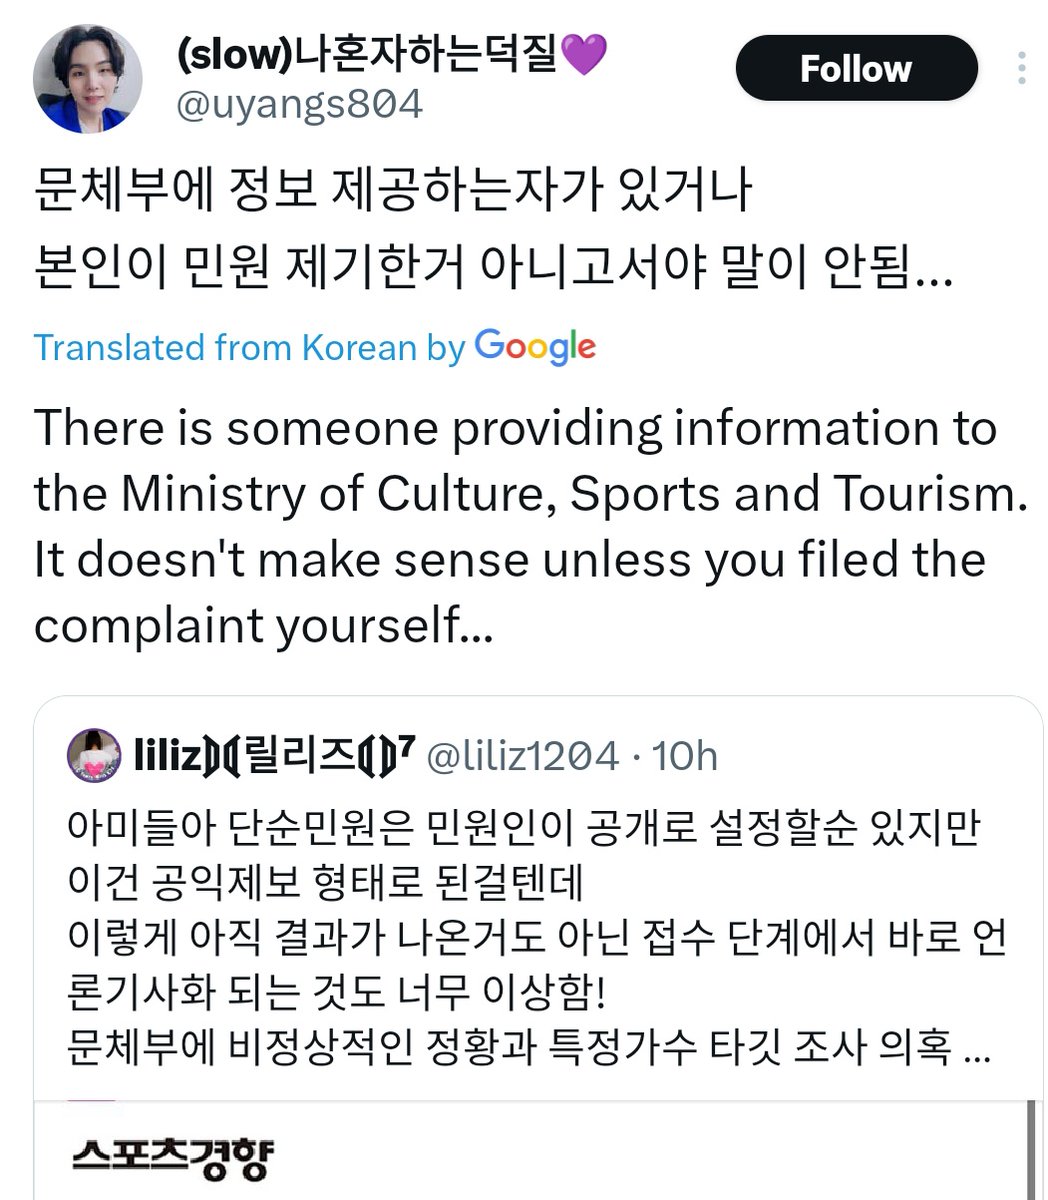 also a lot of karmys are suspicious that the reporter is filing these complaints himself... or he's in contact with the person doing it..